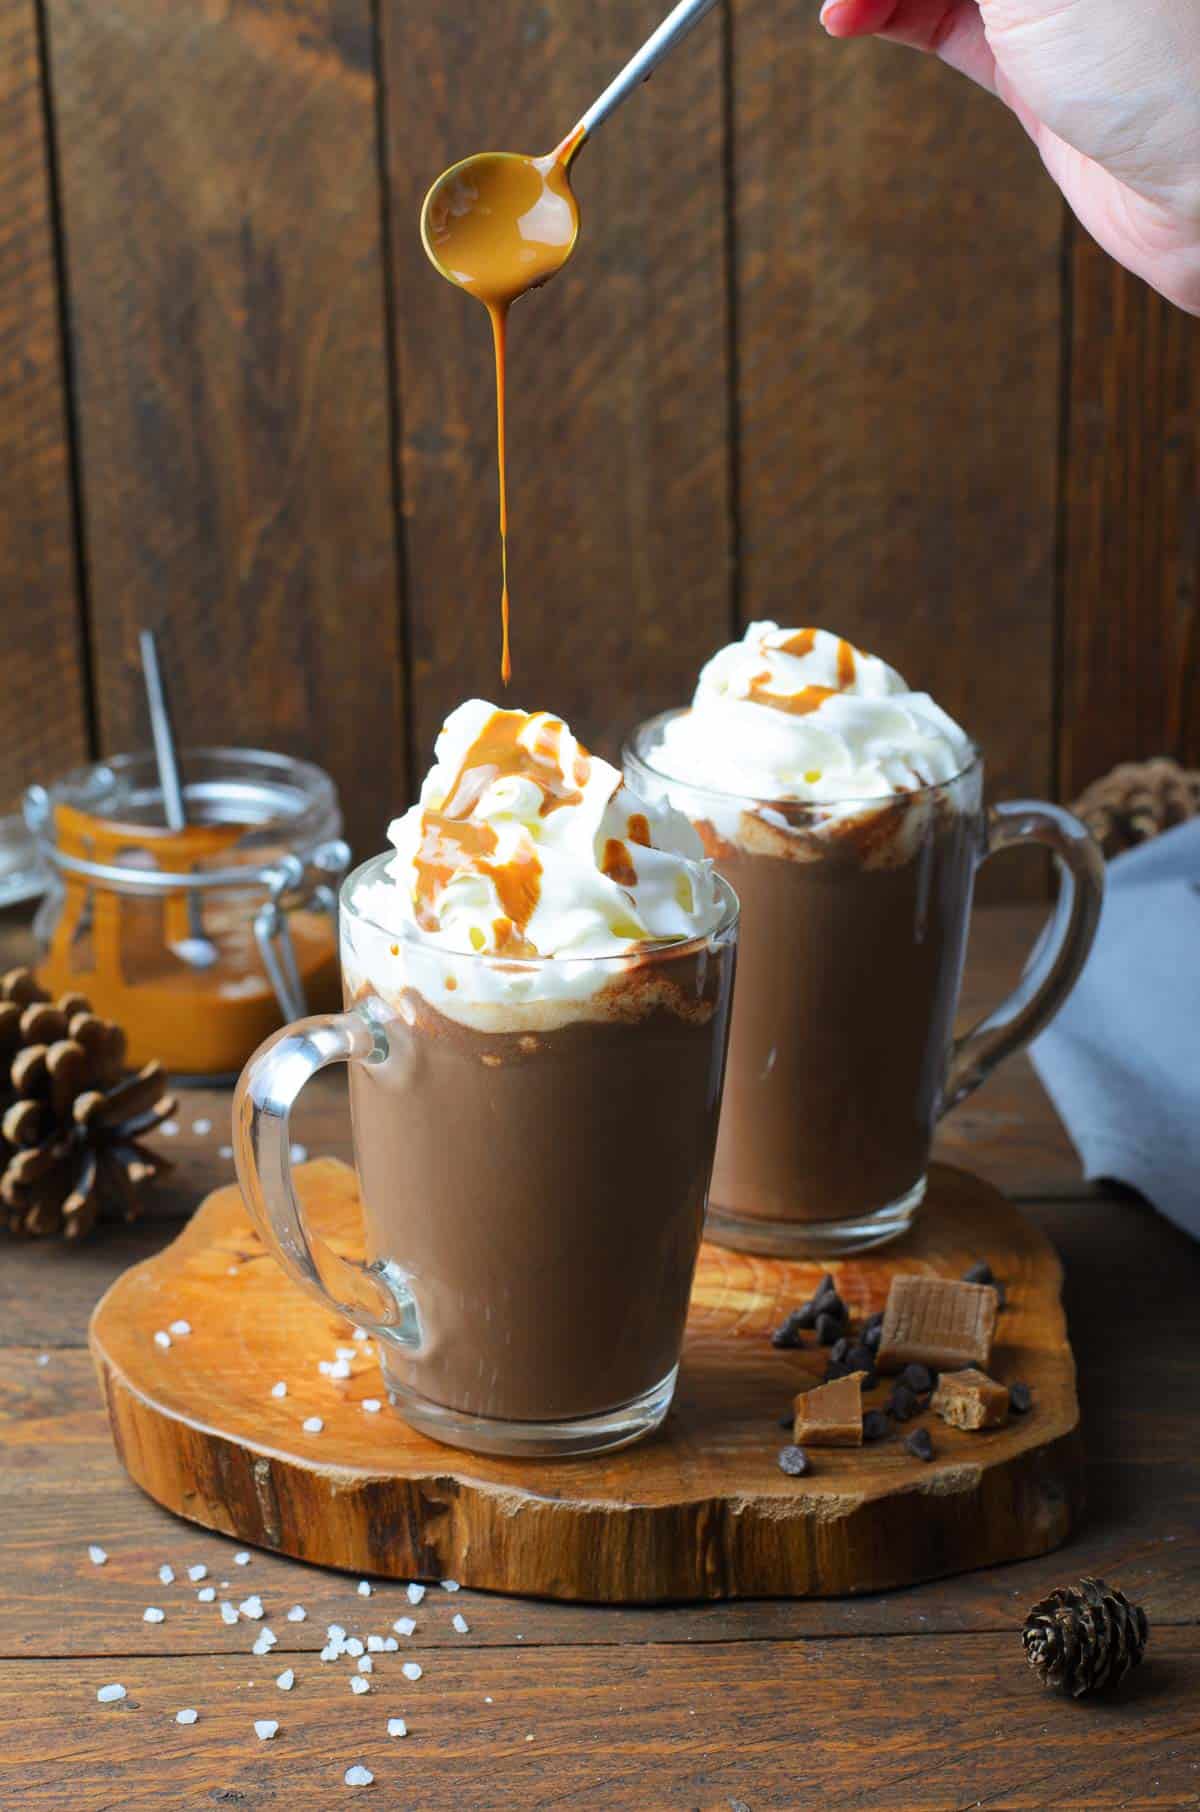 Two clear mugs of hot chocolate topped with whipped cream being drizzled with caramel sauce